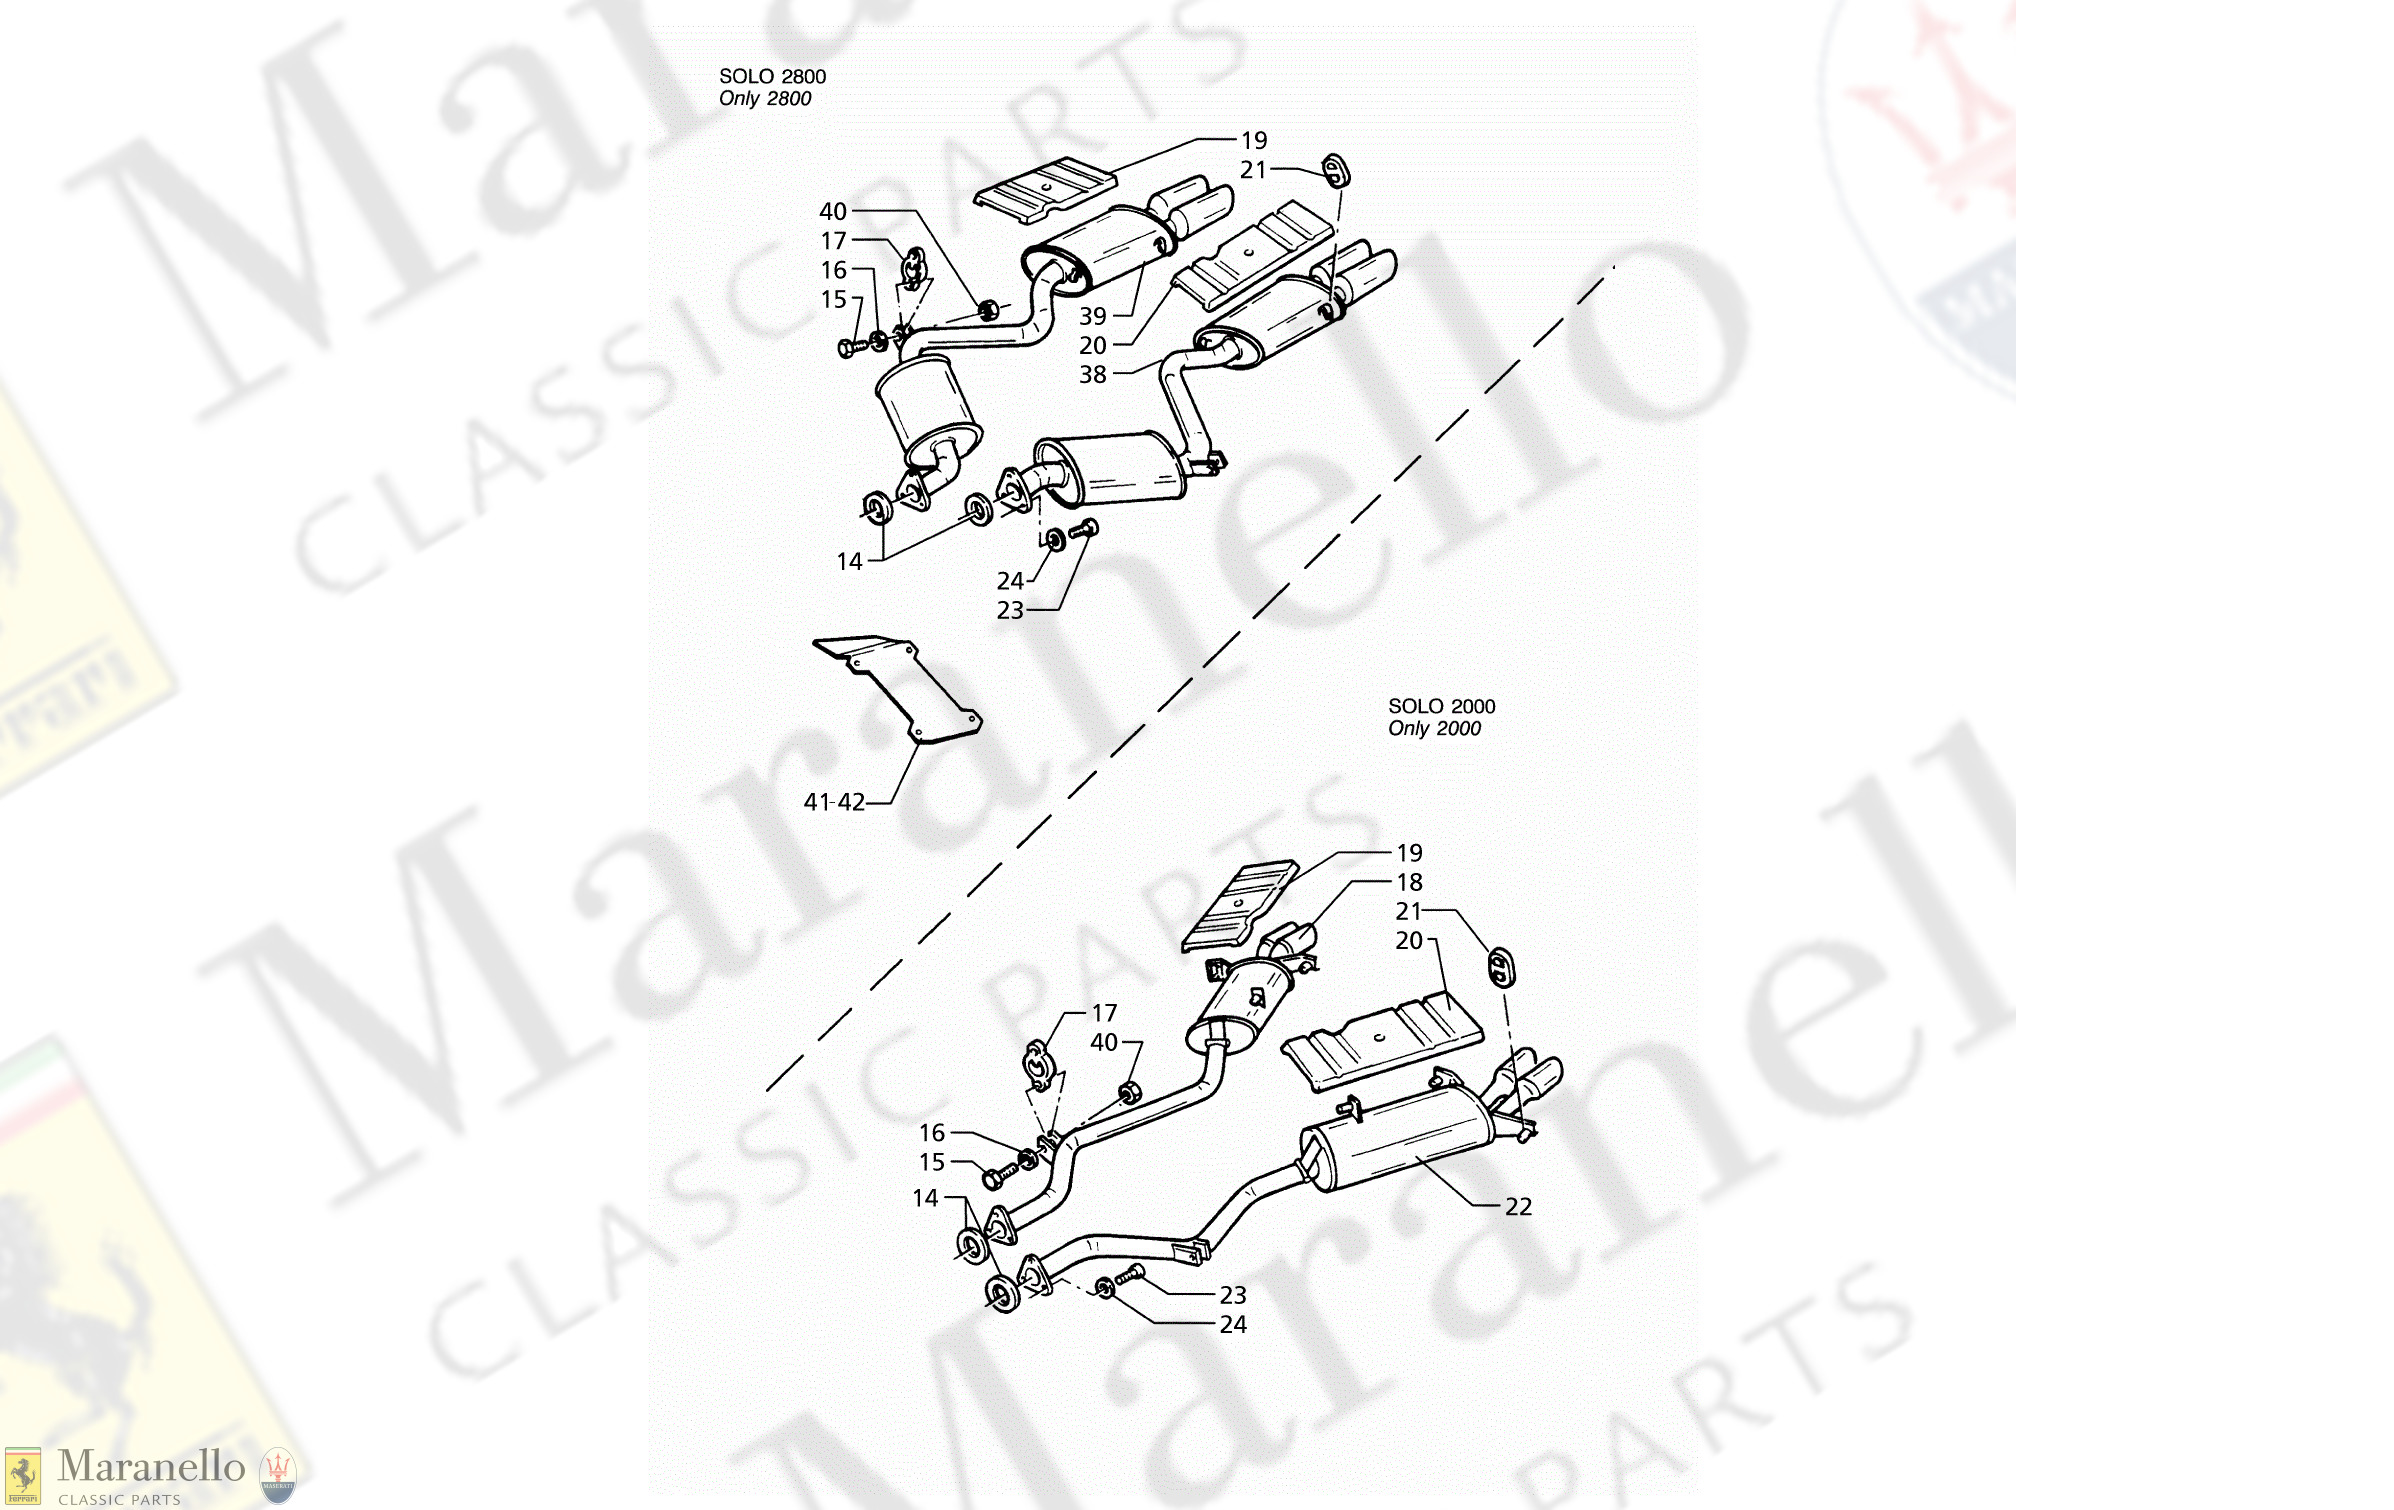 C 24.1 - C 241 - Rear Exhaust System